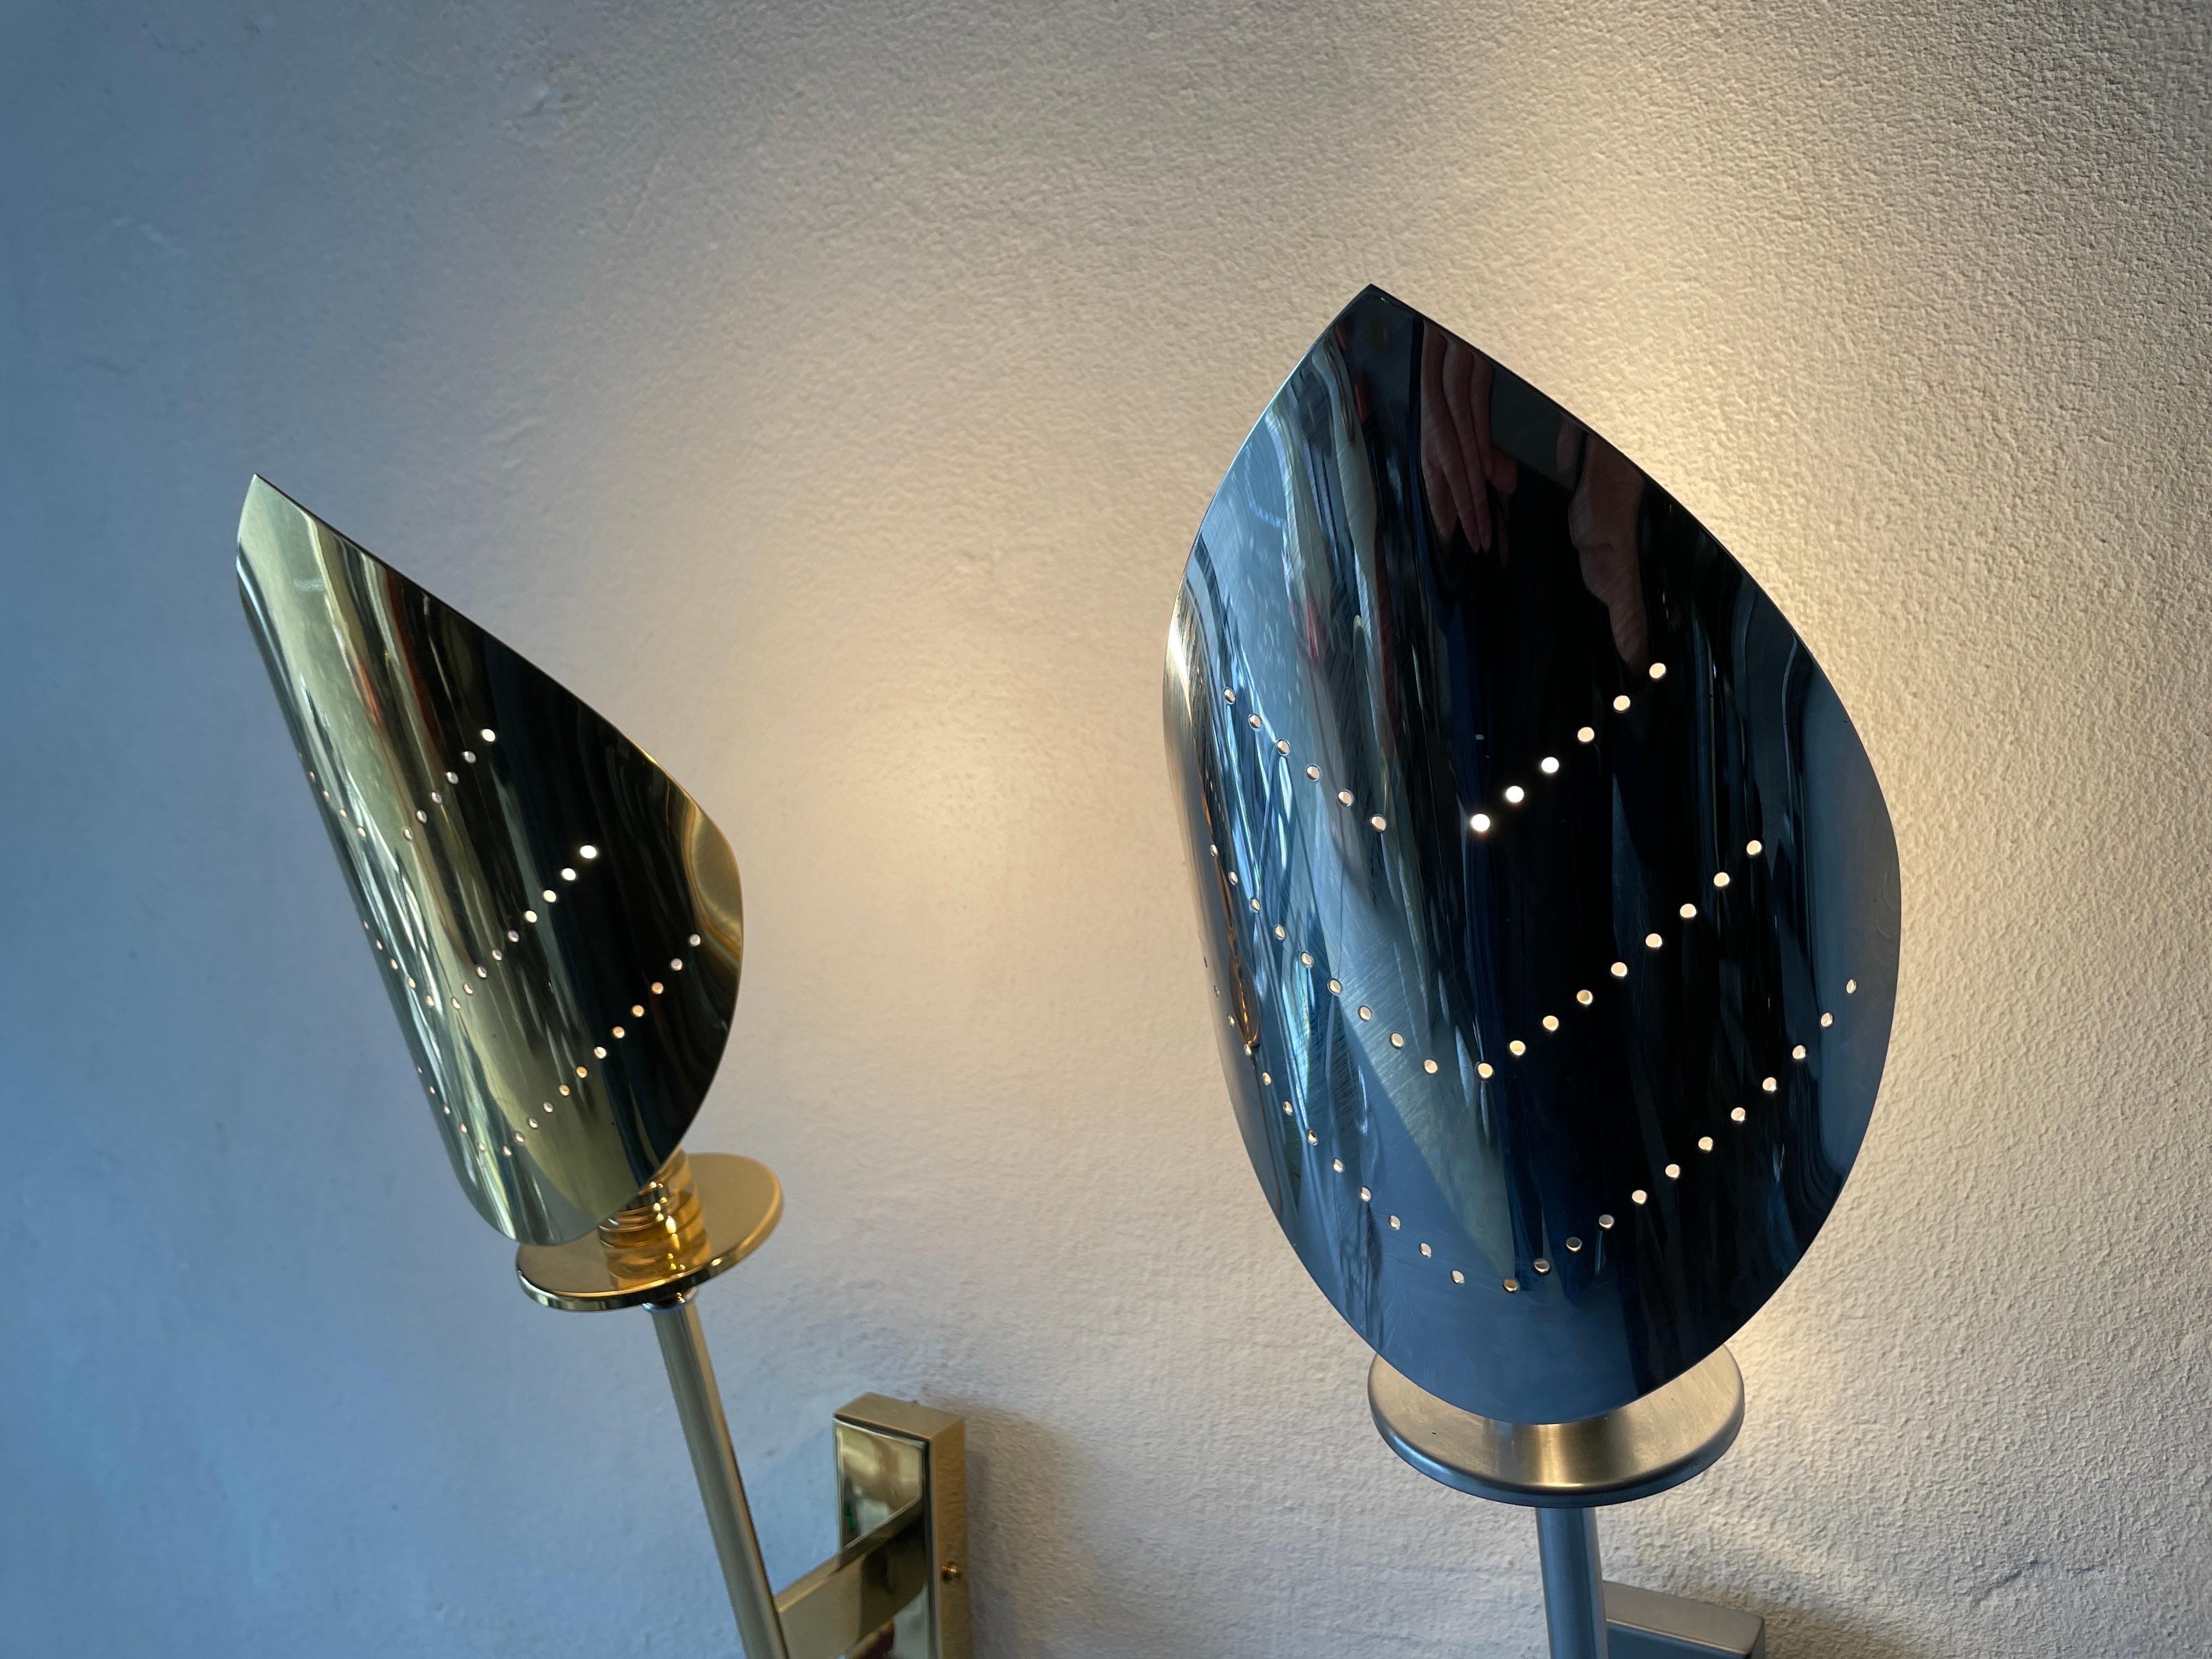 Leaf Shaped Gold and Chrome Pair of Sconces by Baulmann Leuchten, 1980s, Germany For Sale 7